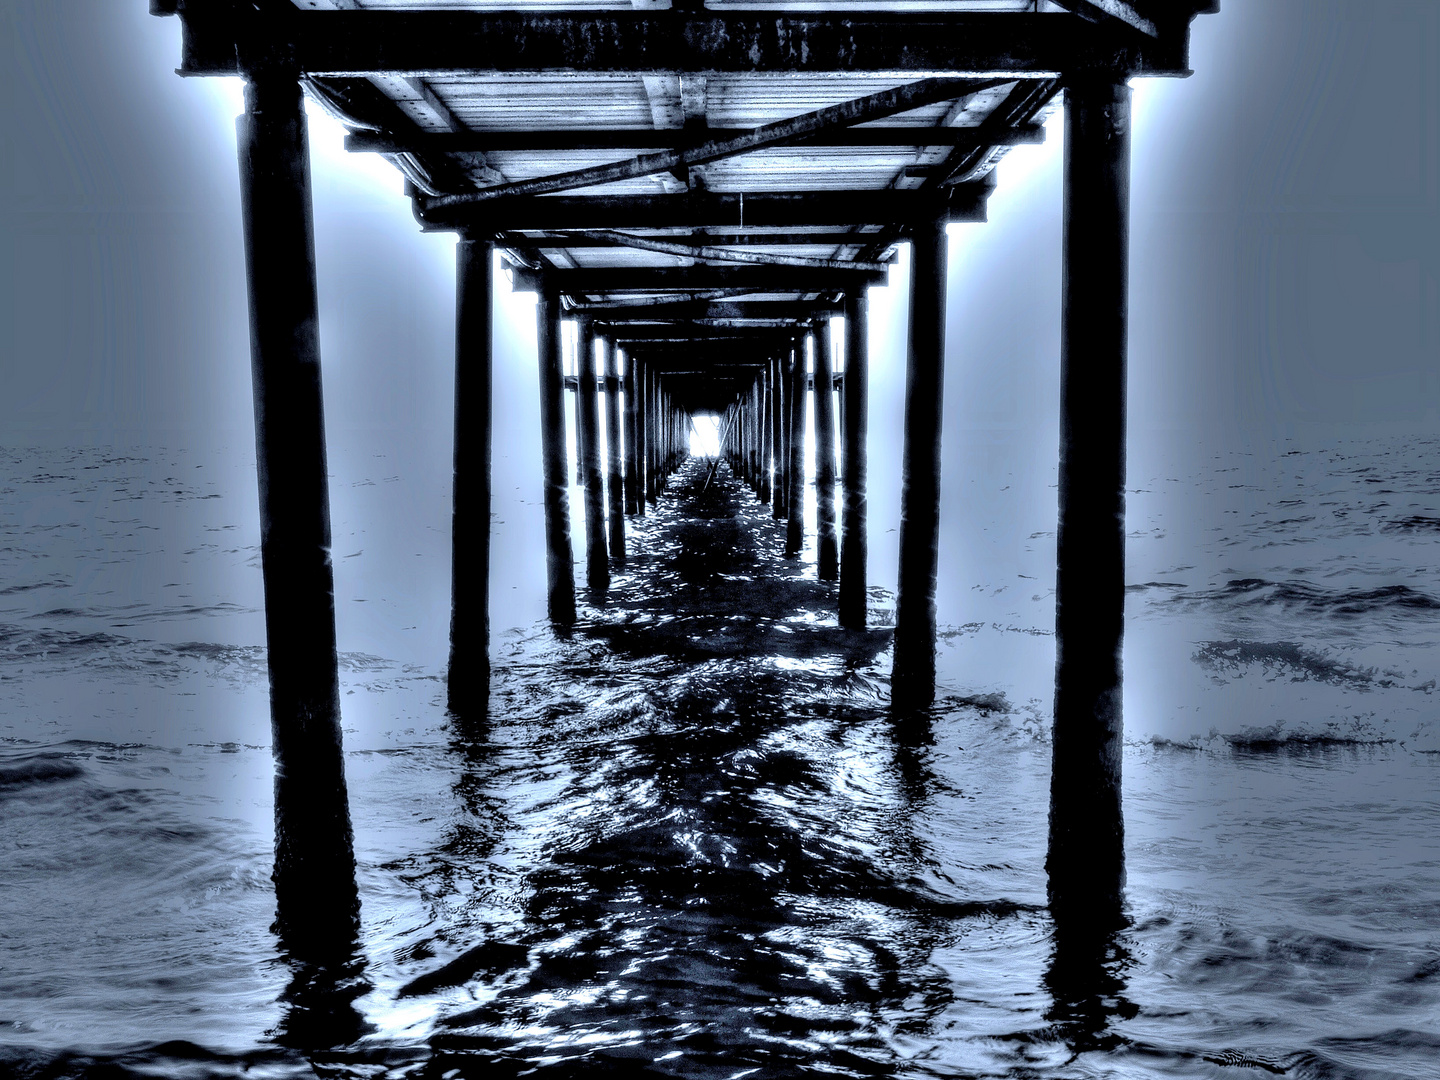 Under the boardwalk ....where do we go to ?